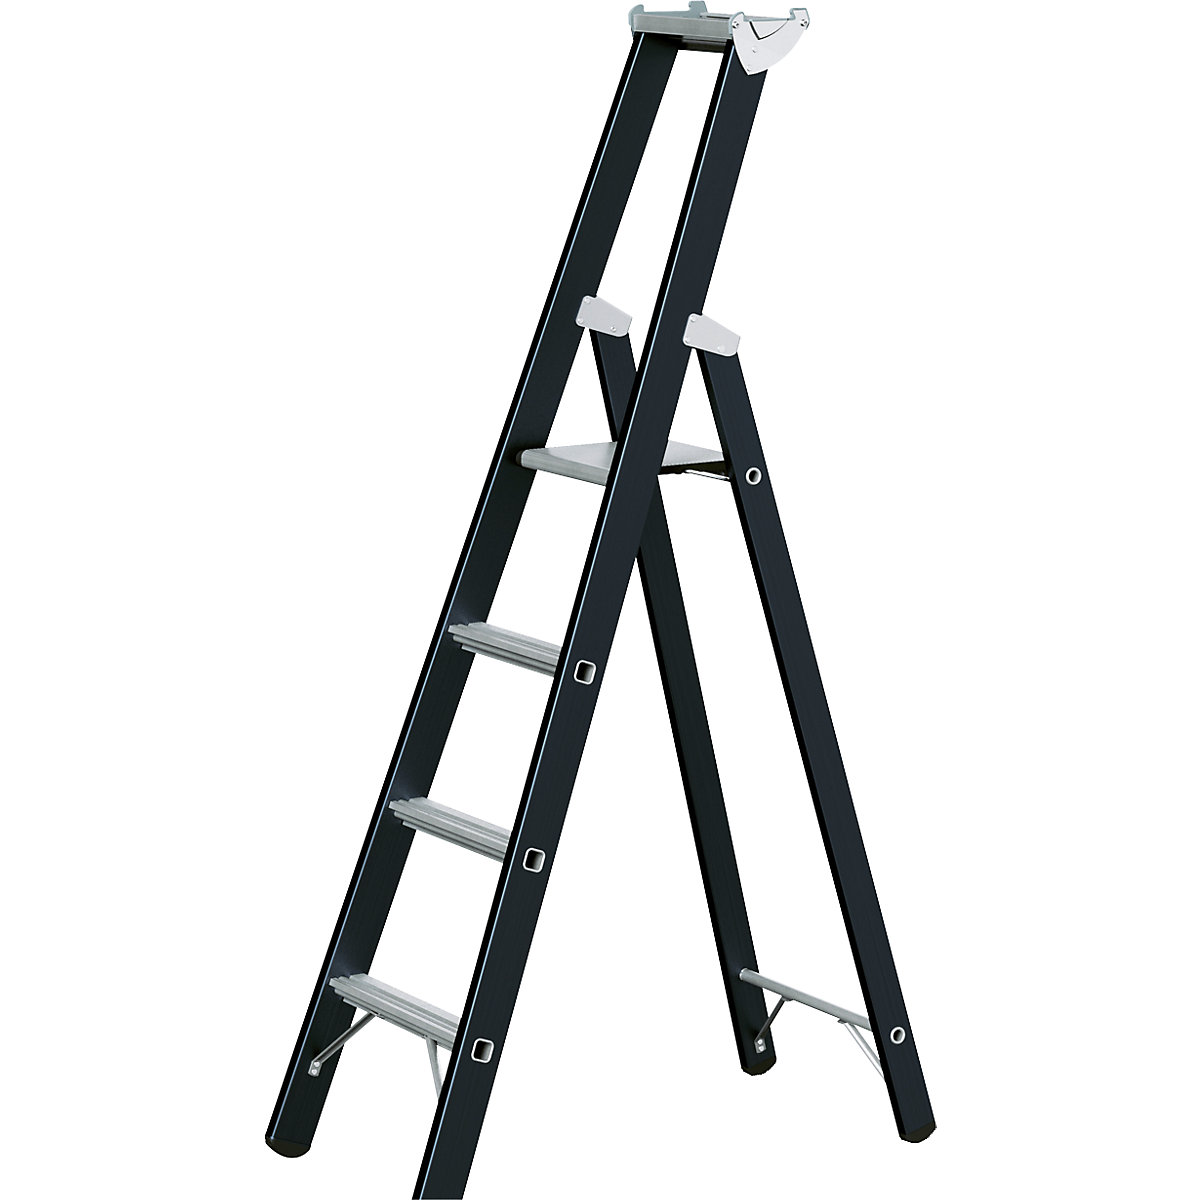 Heavy duty step ladder – ZARGES, single sided, 4 rungs incl. platform-5